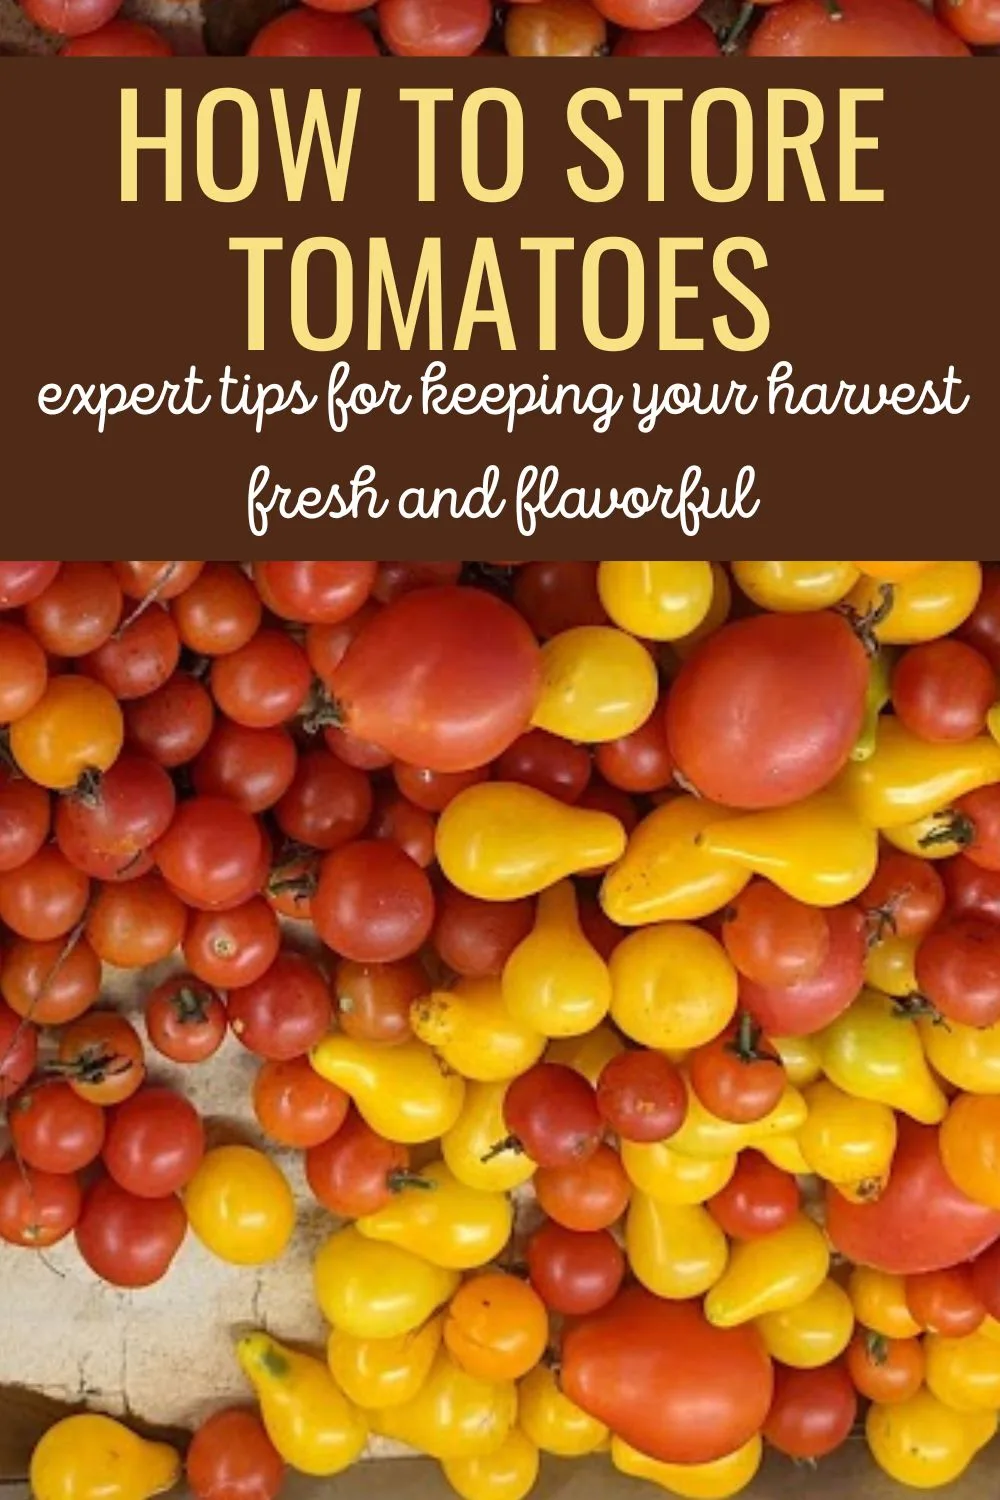 How to Store Tomatoes - Expert Tips for Keeping Your Harvest Fresh and Flavorful